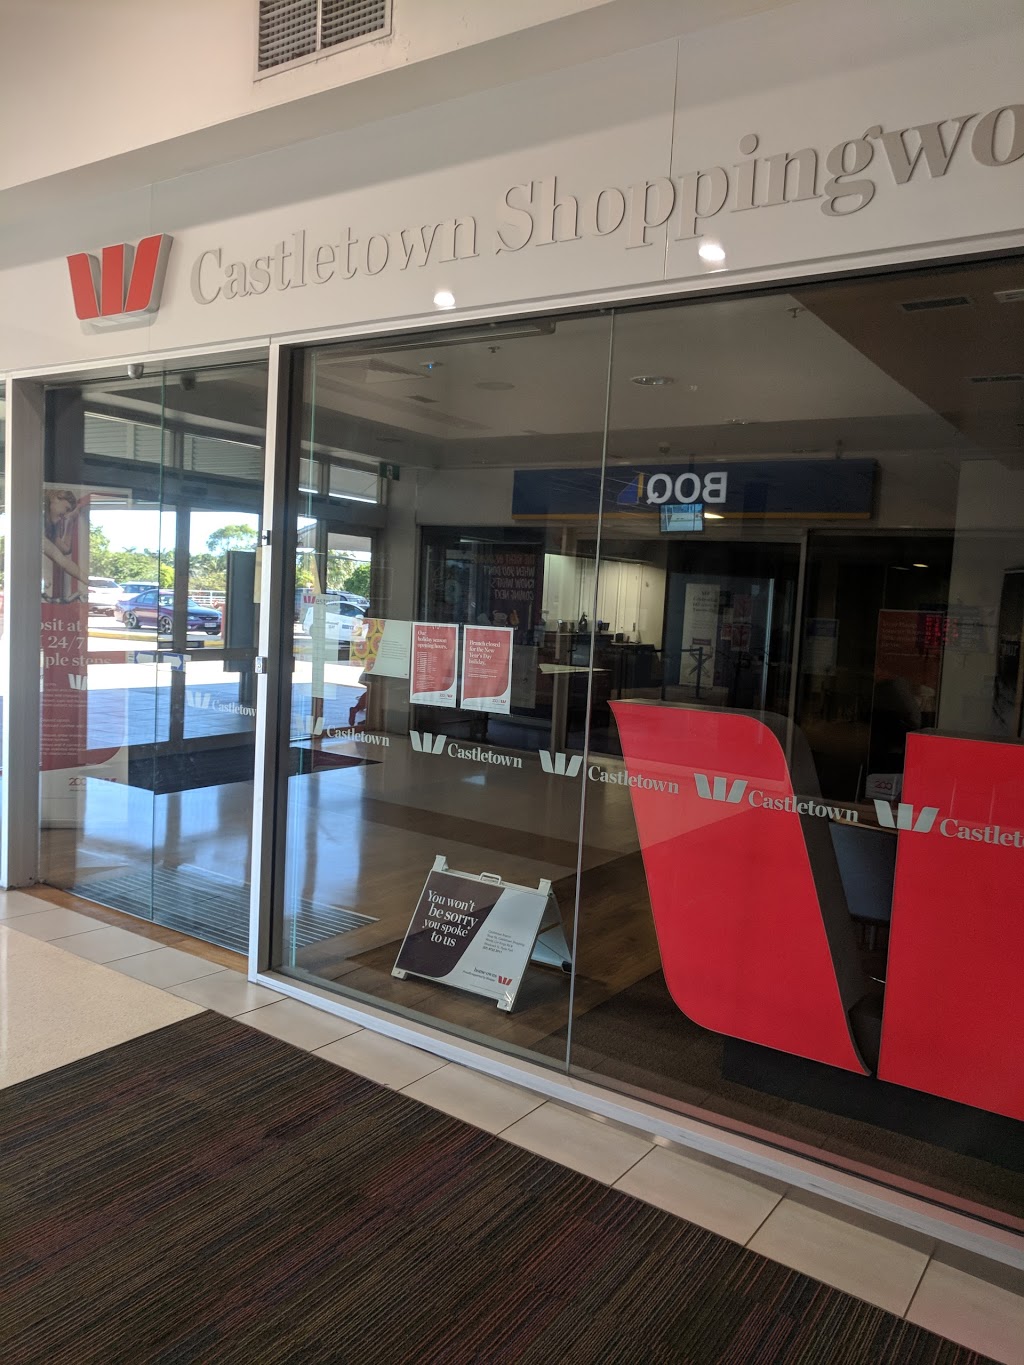 Westpac Branch/ATM | bank | Cnr Kings Rd & Woolcock St, Shop 56; Castletown Shopping World, Hyde Park QLD 4812, Australia | 0747222911 OR +61 7 4722 2911